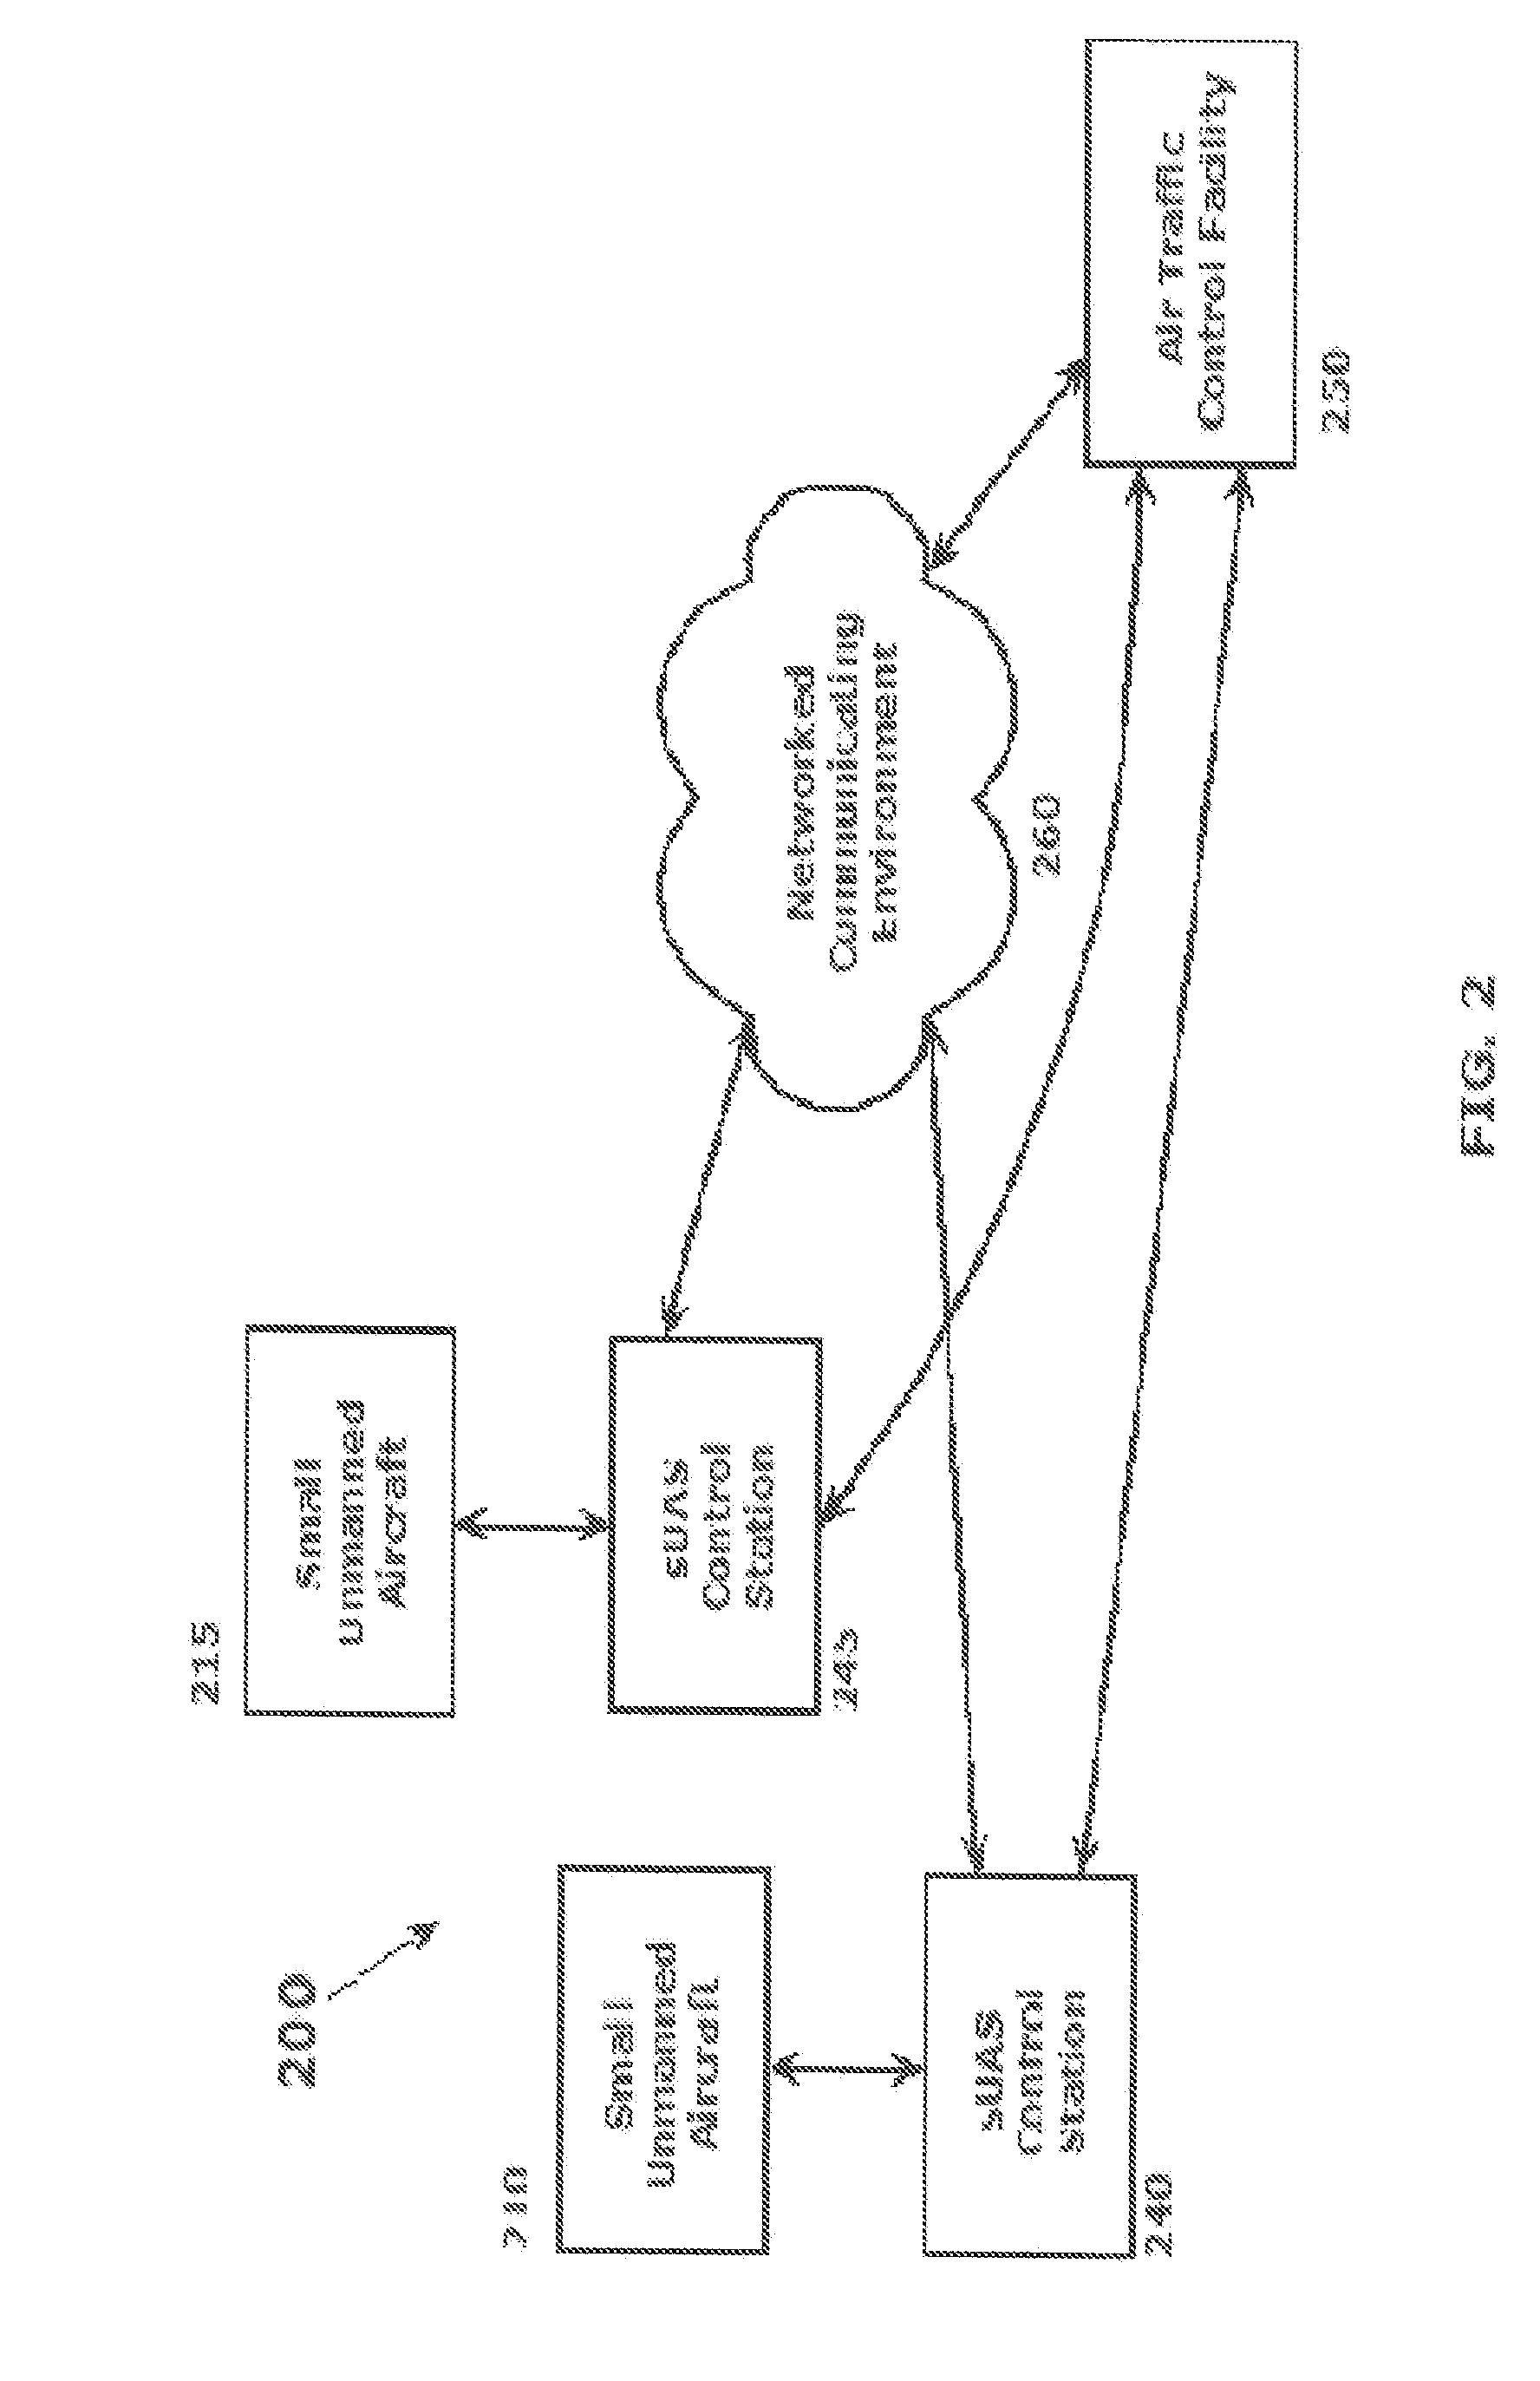 SYSTEMS AND METHODS FOR SMALL UNMANNED AIRCRAFT SYSTEMS (sUAS) TACTICAL TRACKING AND MISSION DATA ACQUISITION